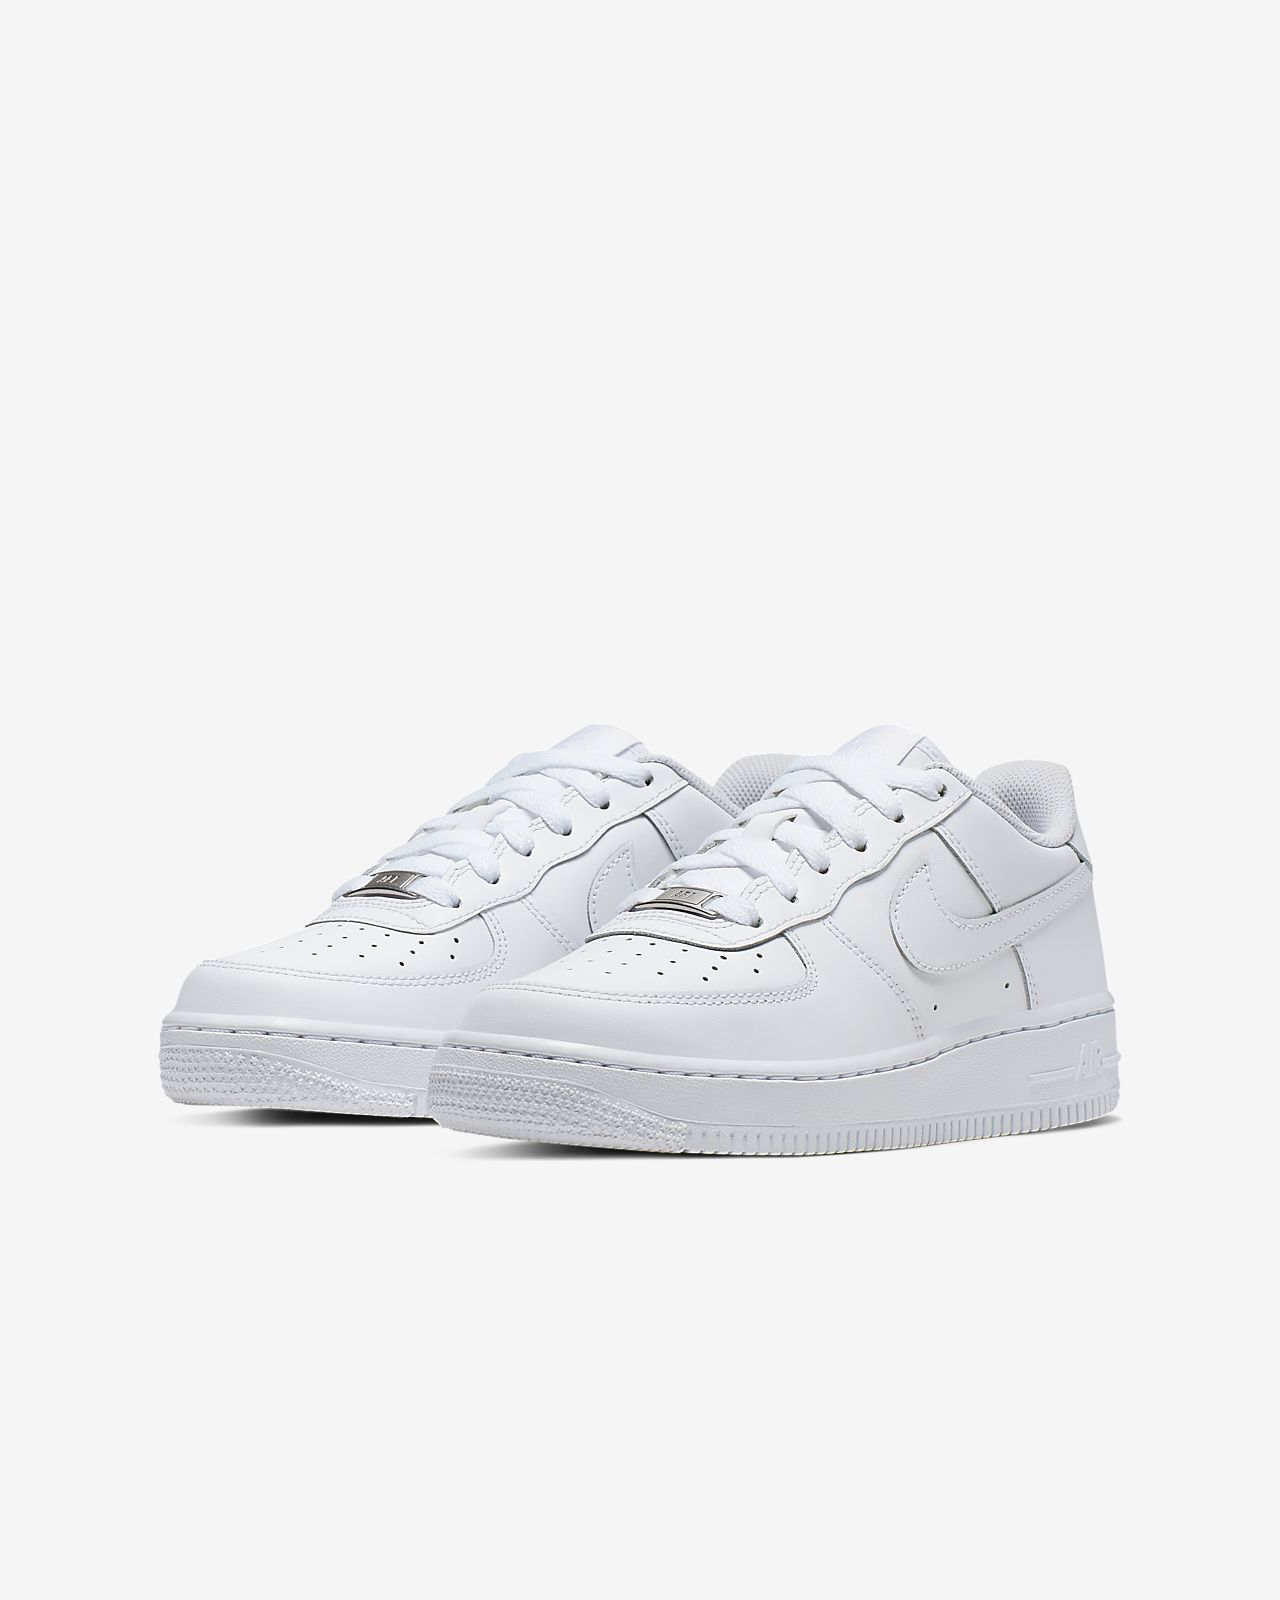 air force 1 kid size